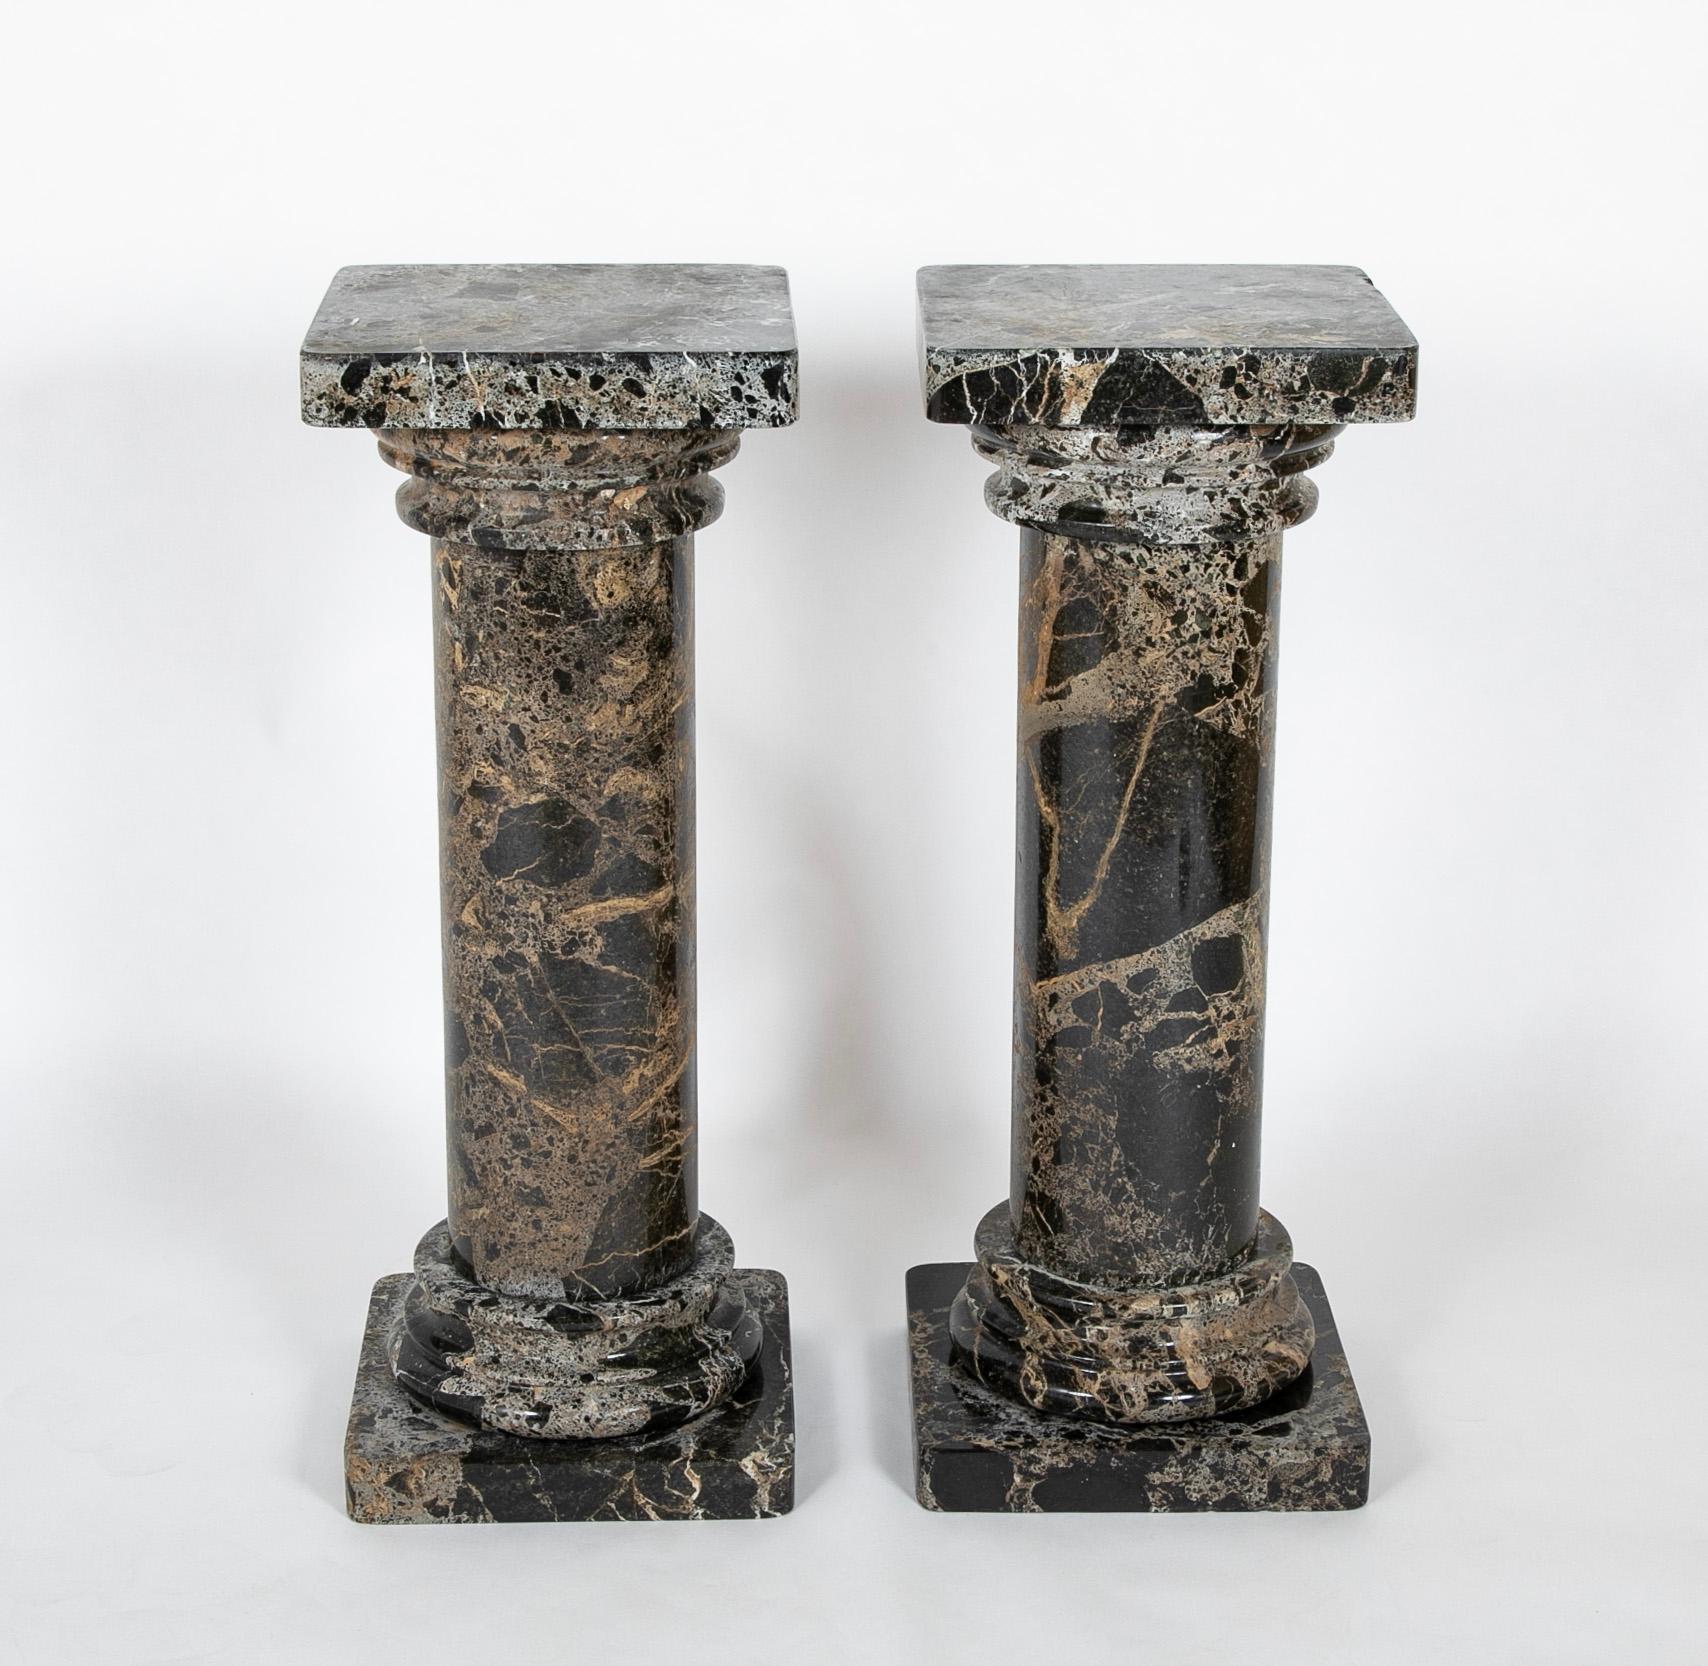 A pair of Breccia marble Italian columns. Early 20th century.

36.24